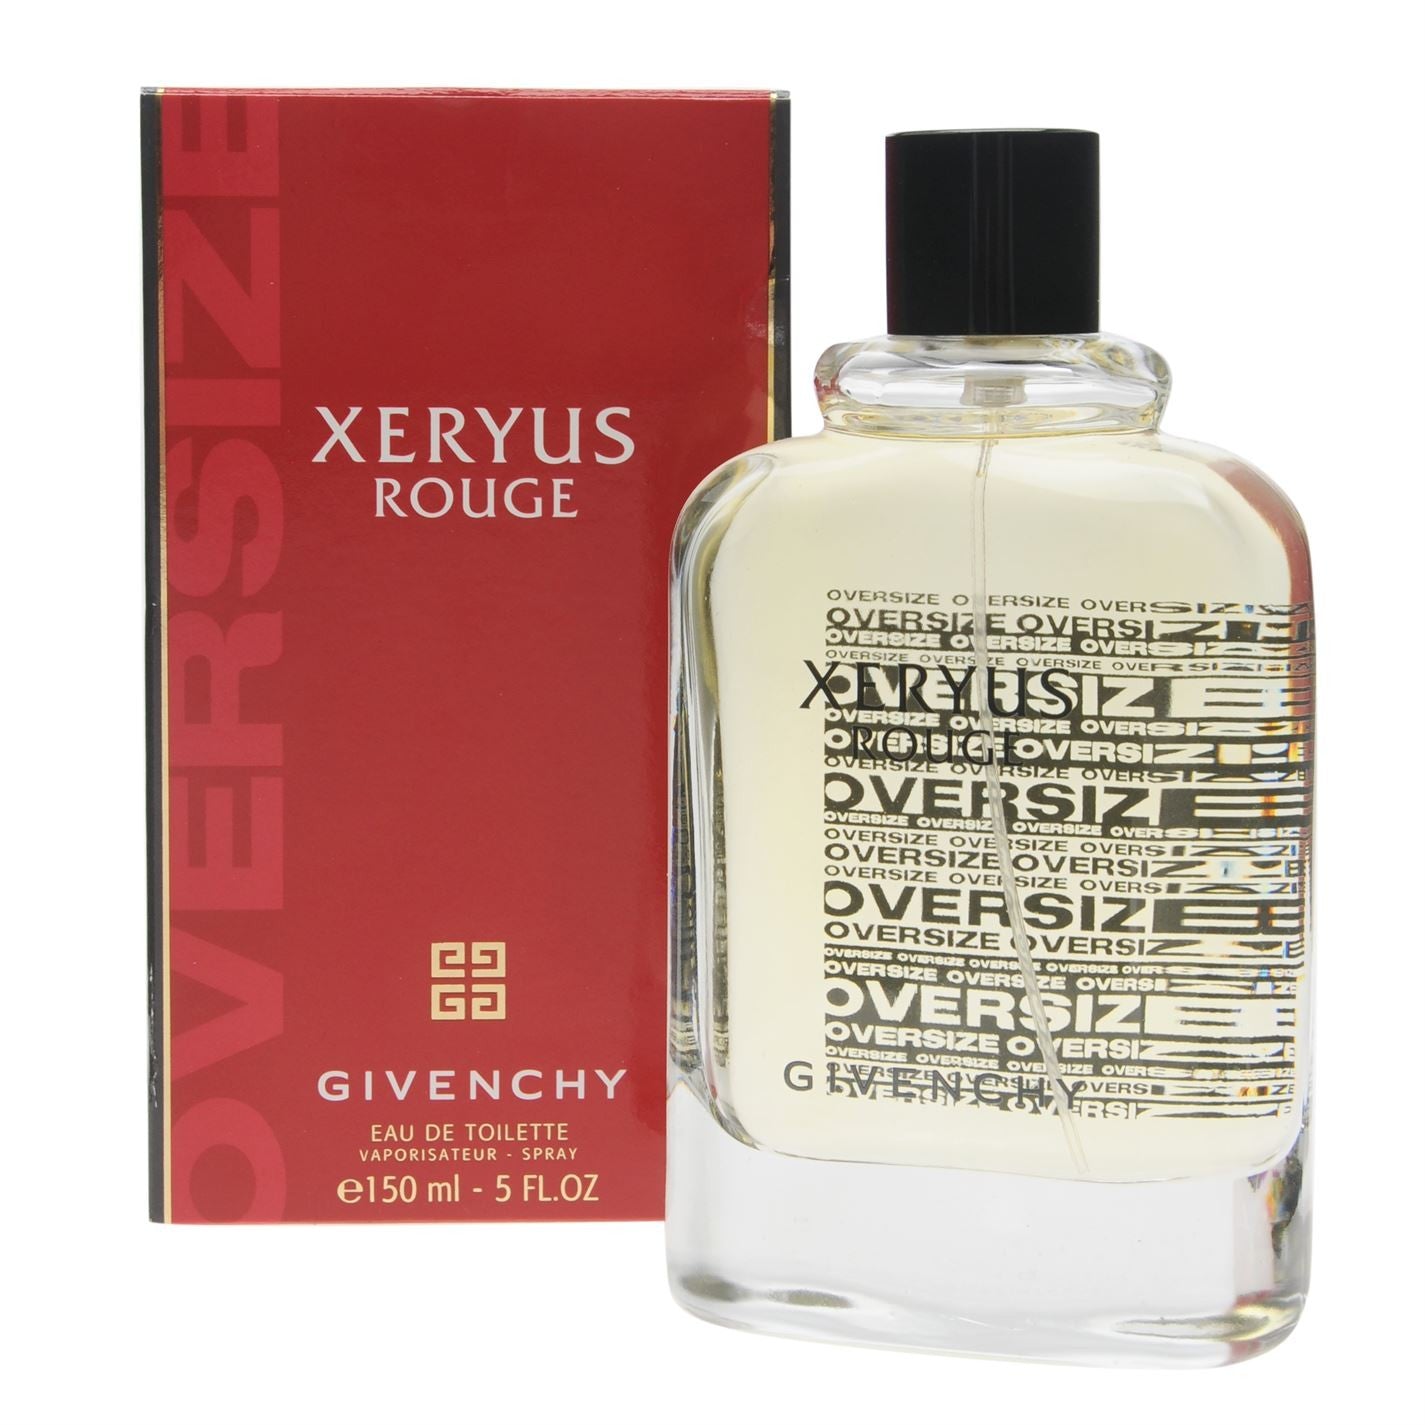 xeryus rouge givenchy price